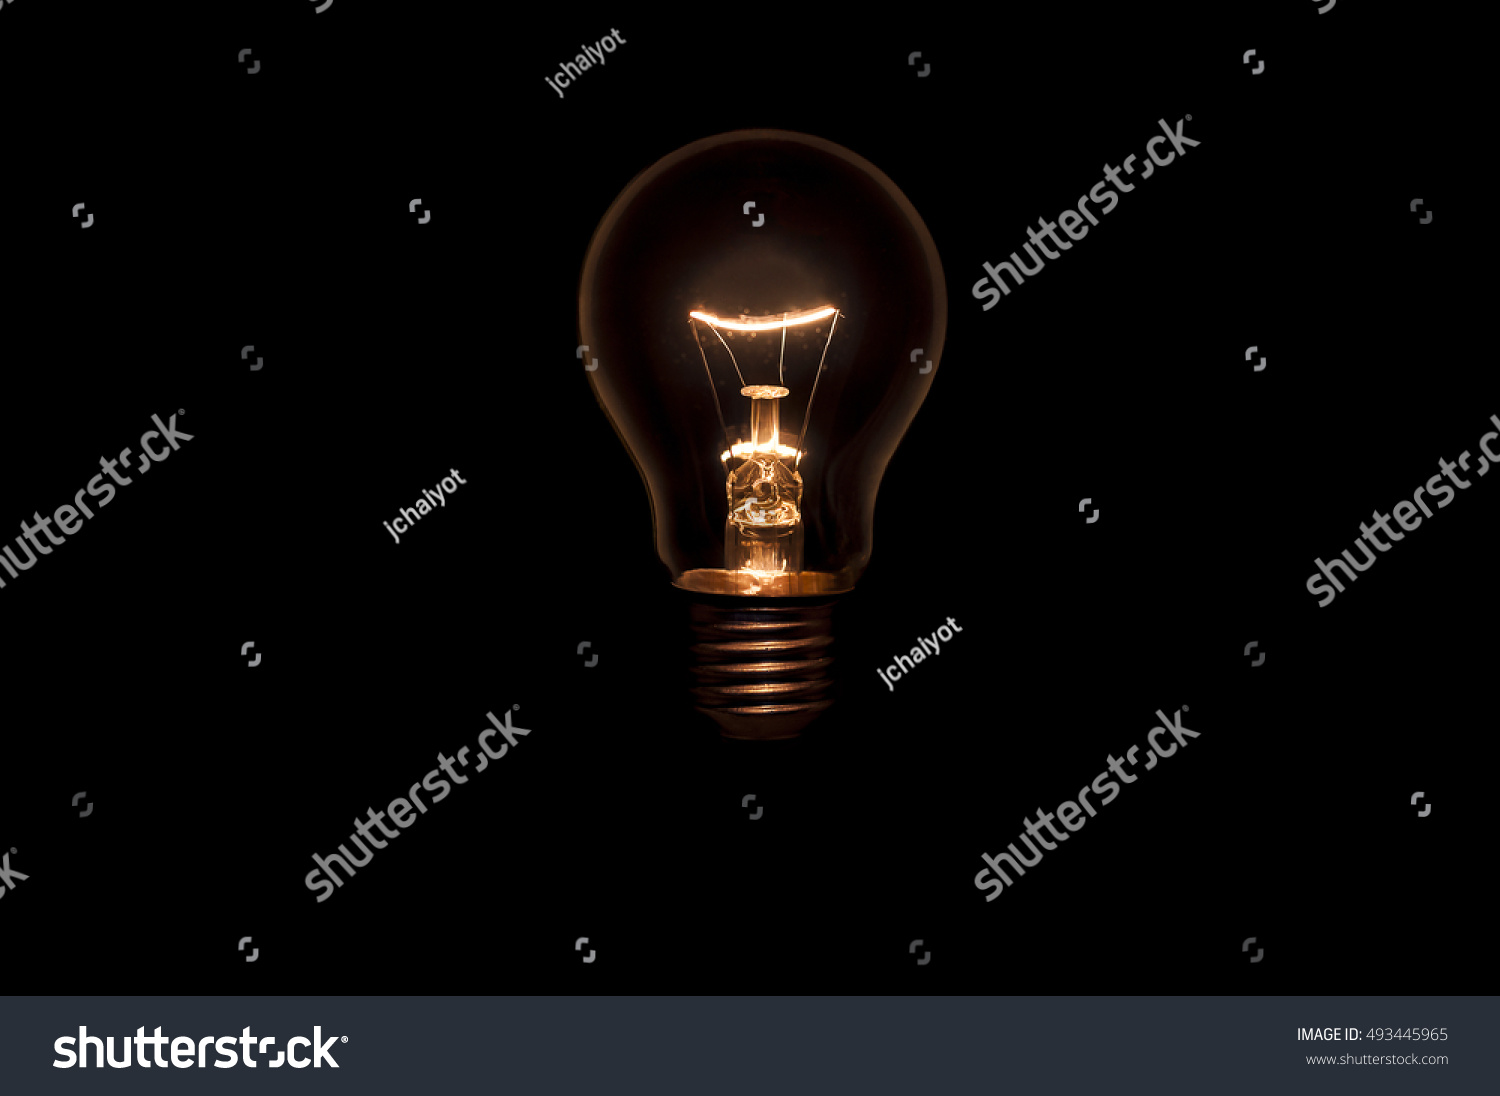 Tungsten light bulb without wiring and socket on black background. Concept for creative idea. #493445965